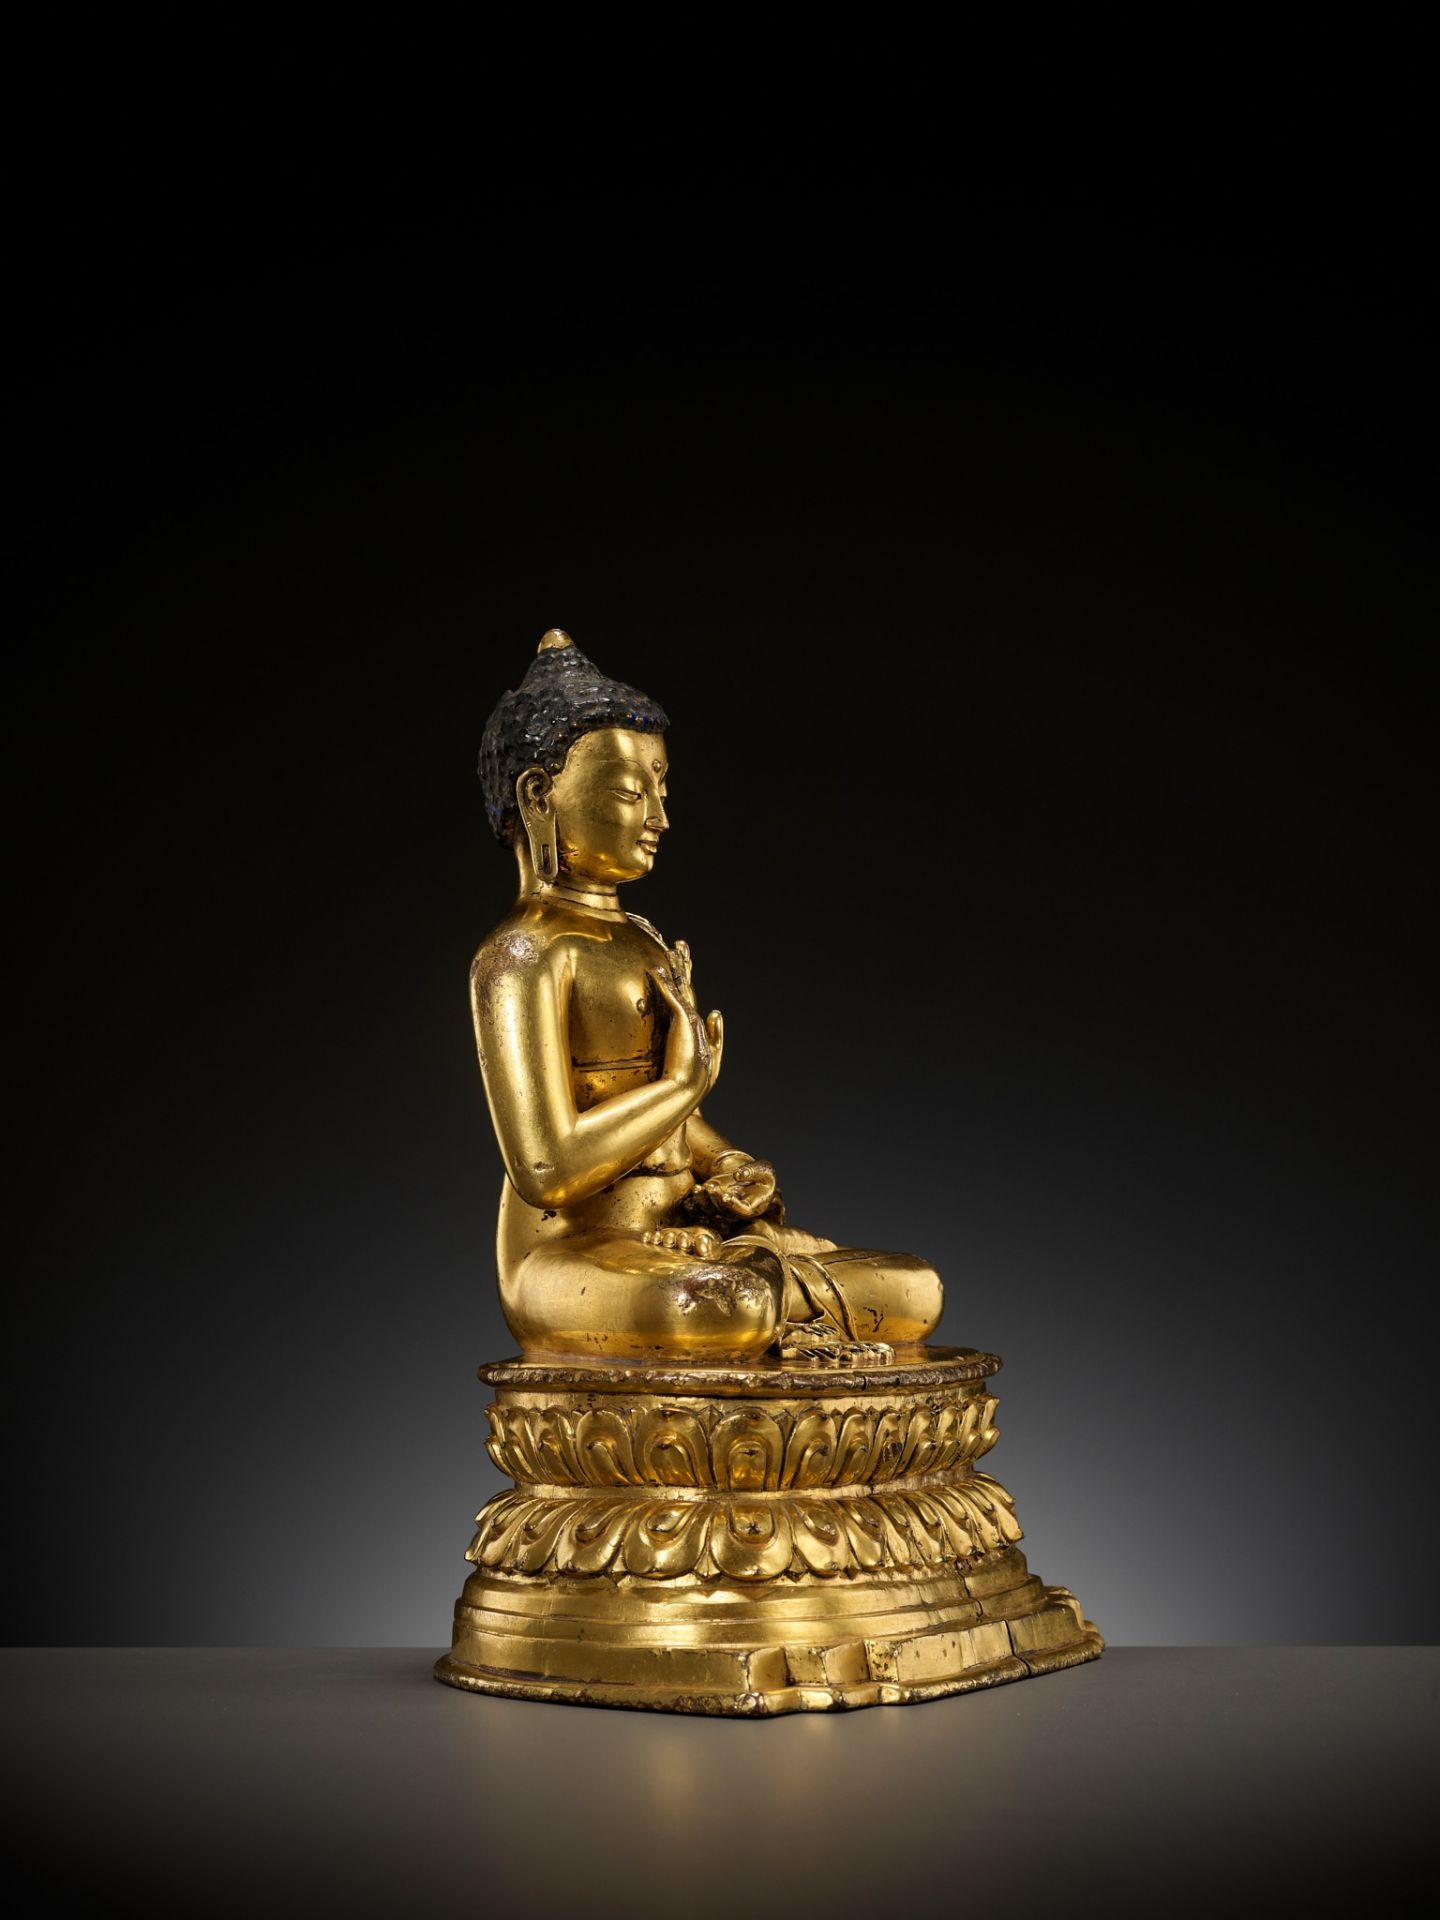 A GILT COPPER ALLOY FIGURE OF AMOGHASIDDHI, POSSIBLY DENSATIL, TIBET, 14TH-15TH CENTURY - Image 18 of 22